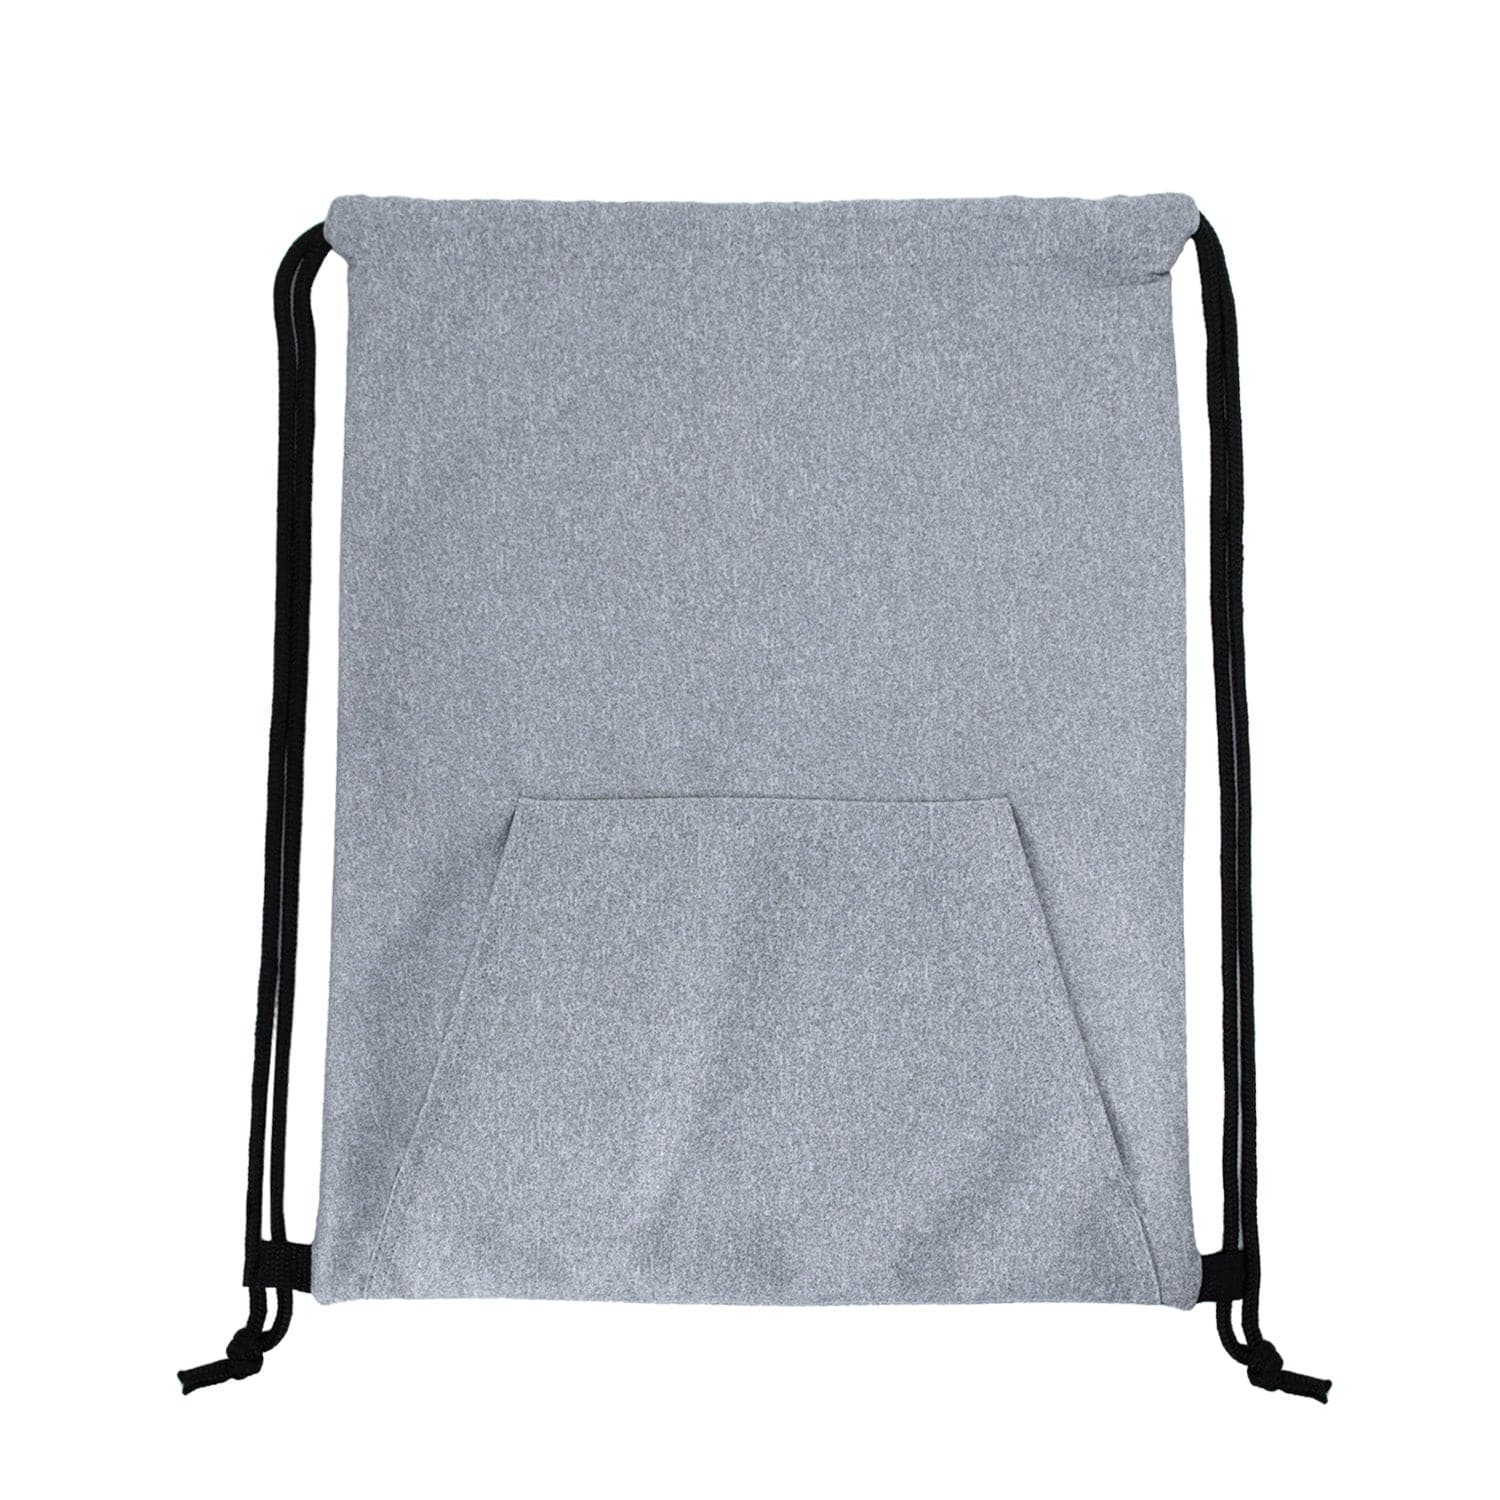 16" Stretchy Drawstring Wholesale Backpack in Grey - Bulk Case of 50